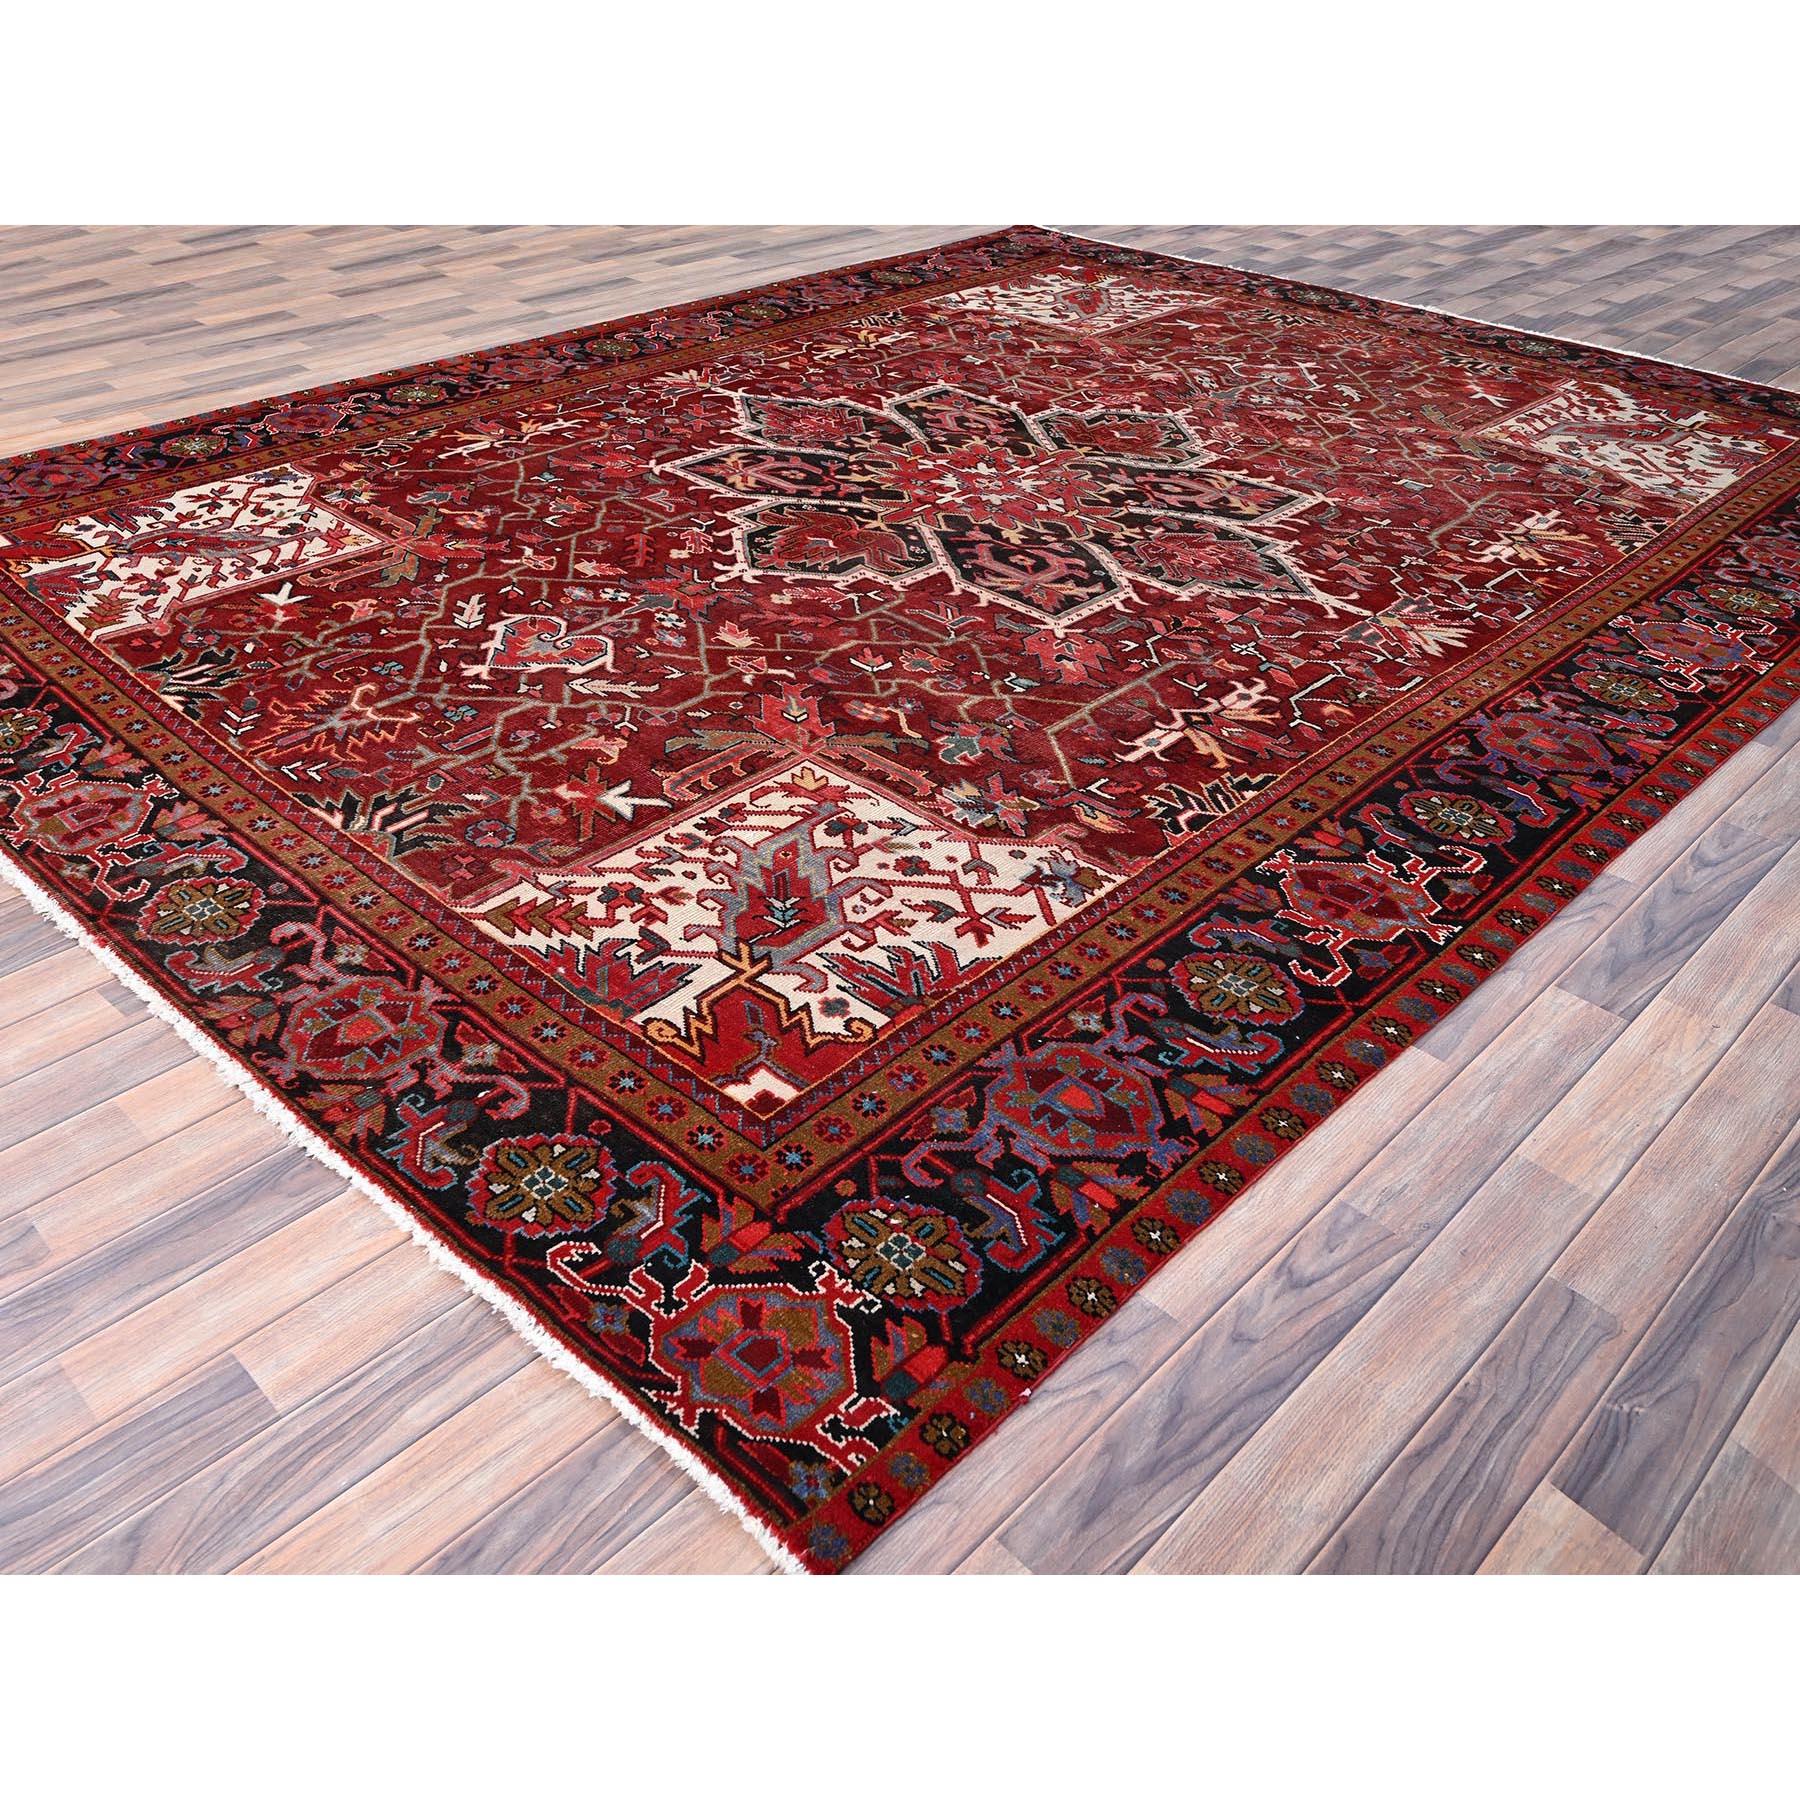 This fabulous Hand-Knotted carpet has been created and designed for extra strength and durability. This rug has been handcrafted for weeks in the traditional method that is used to make
Exact Rug Size in Feet and Inches : 9'10